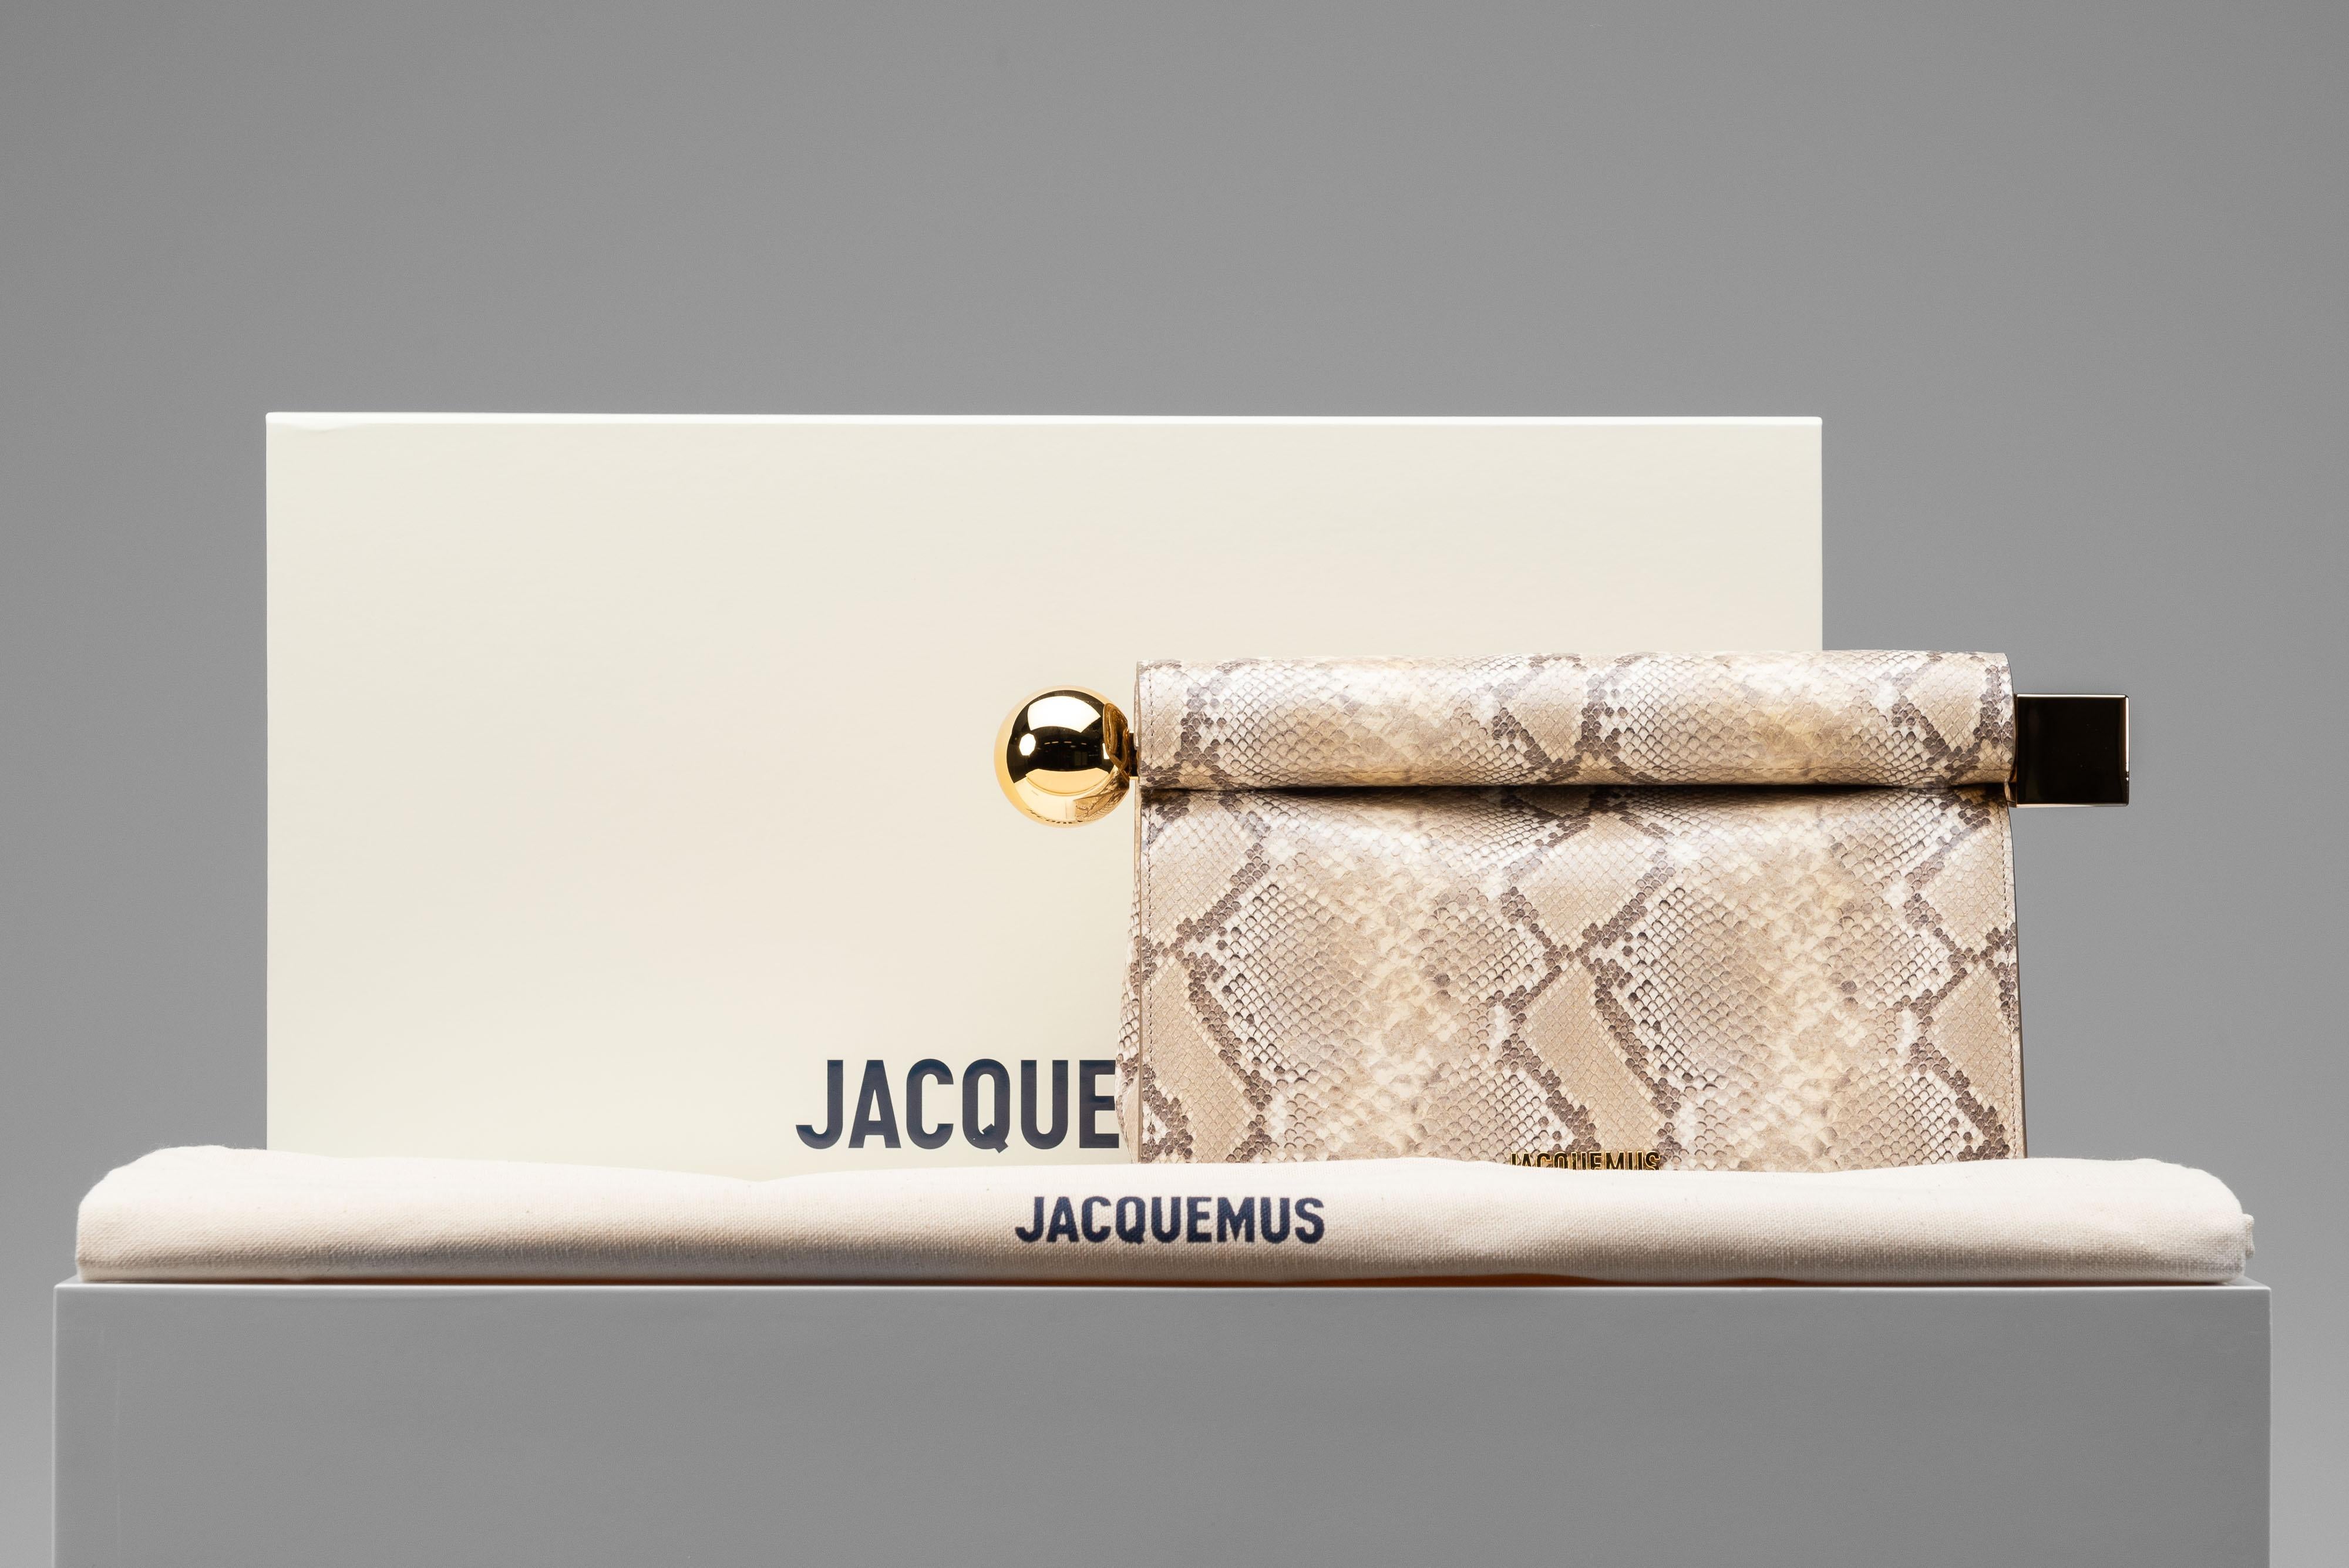 From the collection of SAVINETI we offer this NEW Jacquemus Take-out Clutch:

- Brand: Jacquemus
- Model: Clutch Les Sculptures
- Color: Beige
- Year: 2024
- Condition: NEW (unused)
- Extras: Full-Set (Dustbag, Box & Receipt)

Details:
- Faux-python